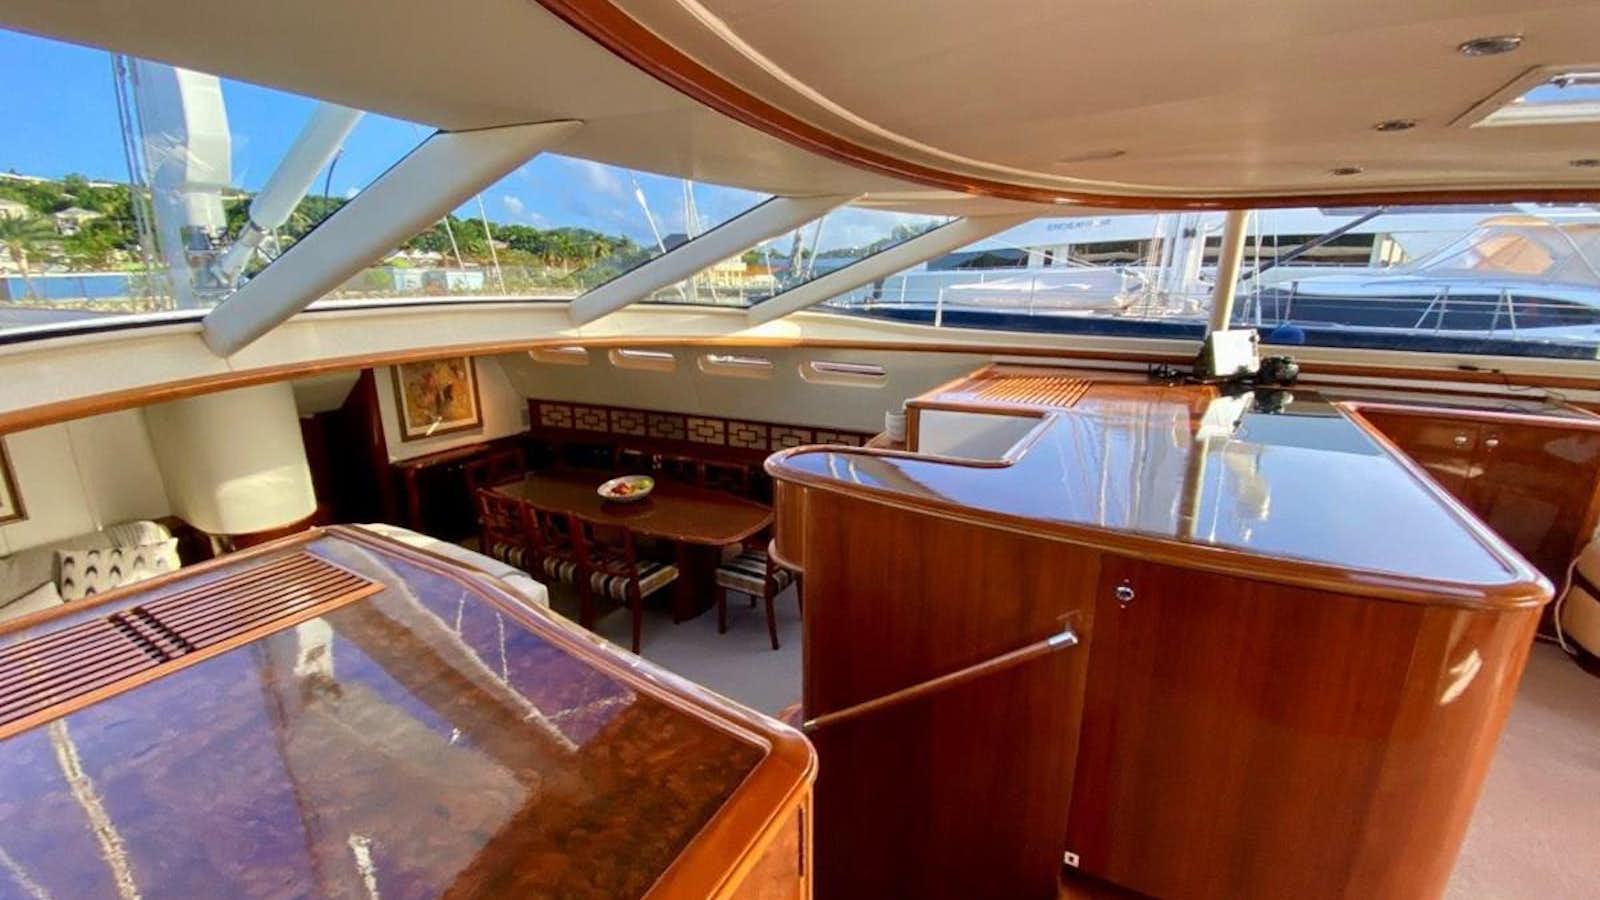 Miss silver
Yacht for Sale